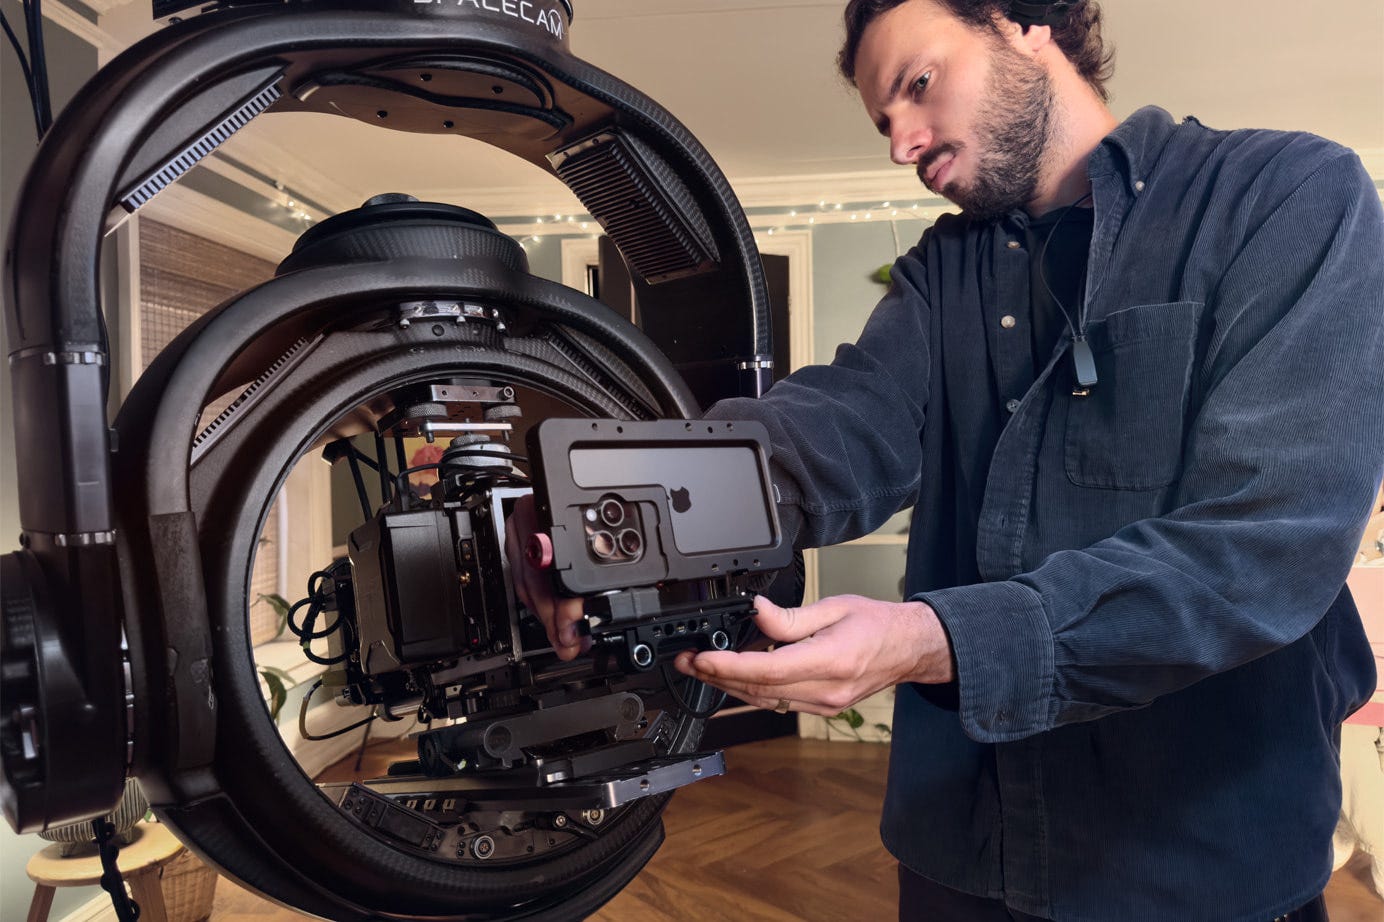 With a custom SpaceCam rig that’s regularly used on major productions, the team could work seamlessly with iPhone as their main camera and get the same complex shots they were used to.